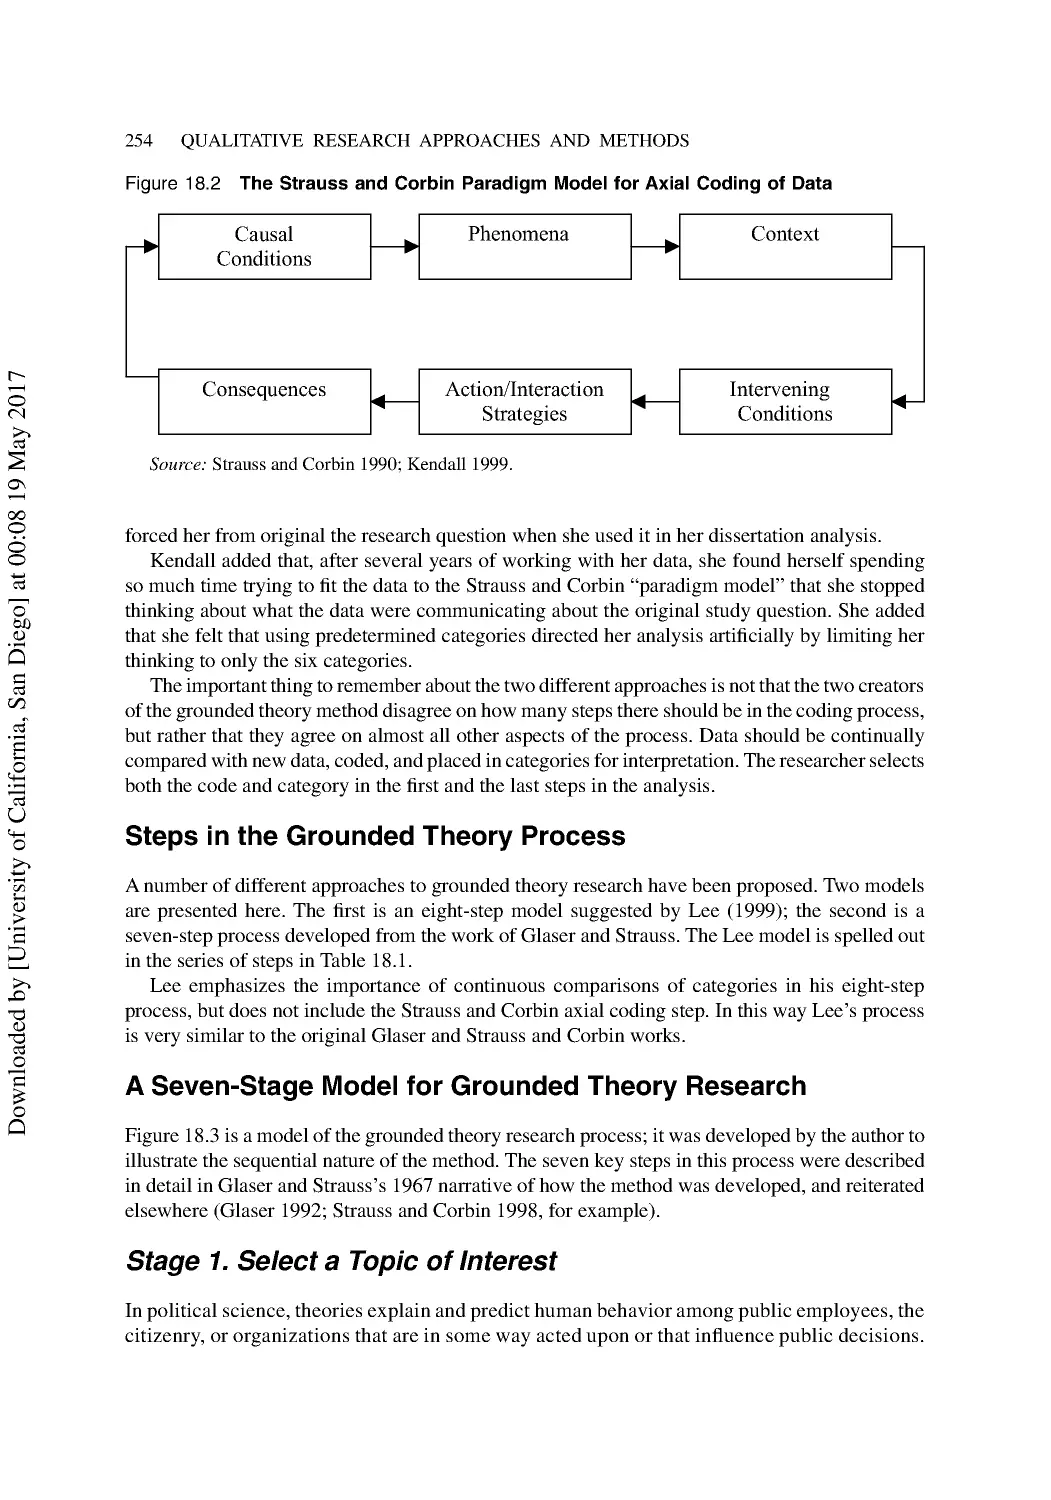 Steps in the Grounded Theory Process
A Seven-Stage Model for Grounded Theory Research